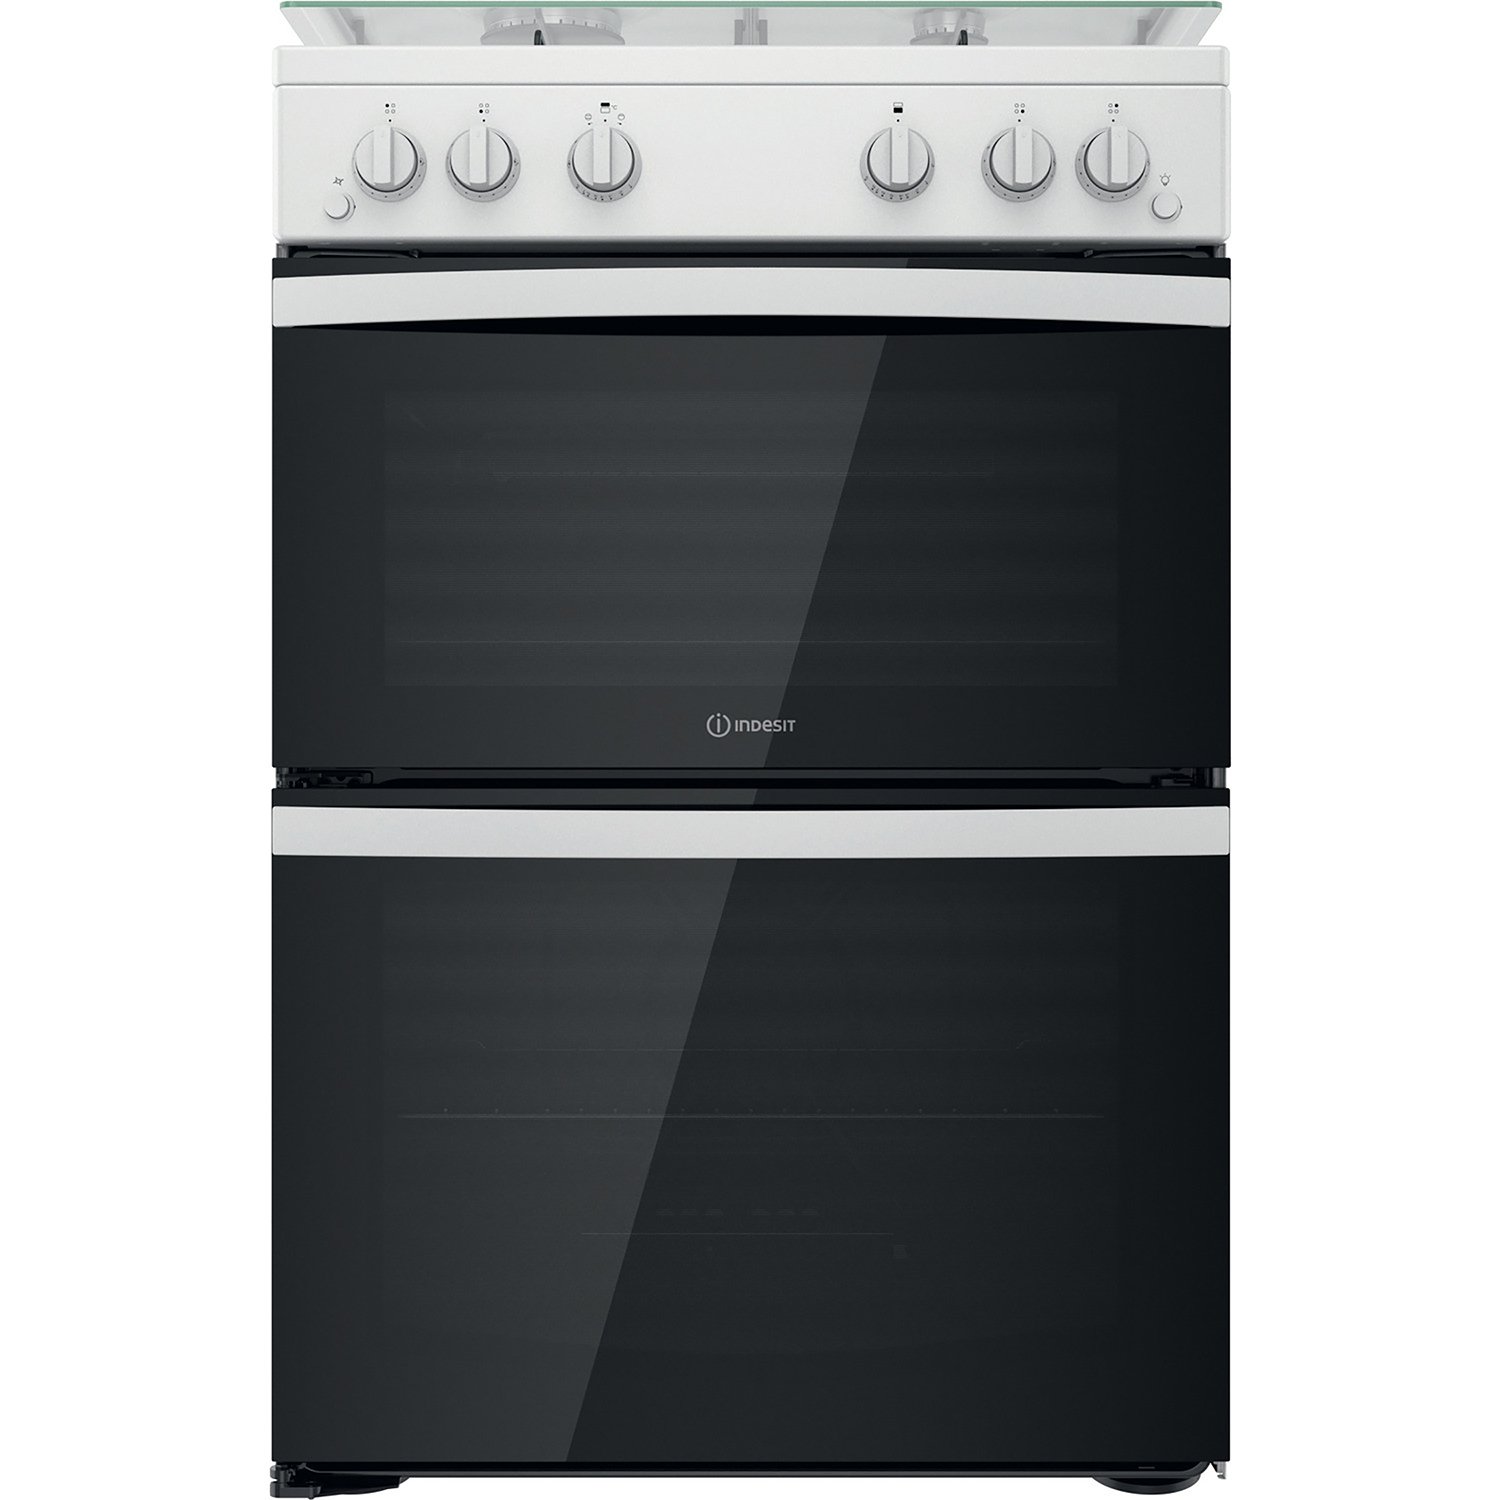 Indesit ID67G0MCW/UK 60cm Double Oven Gas Cooker - White